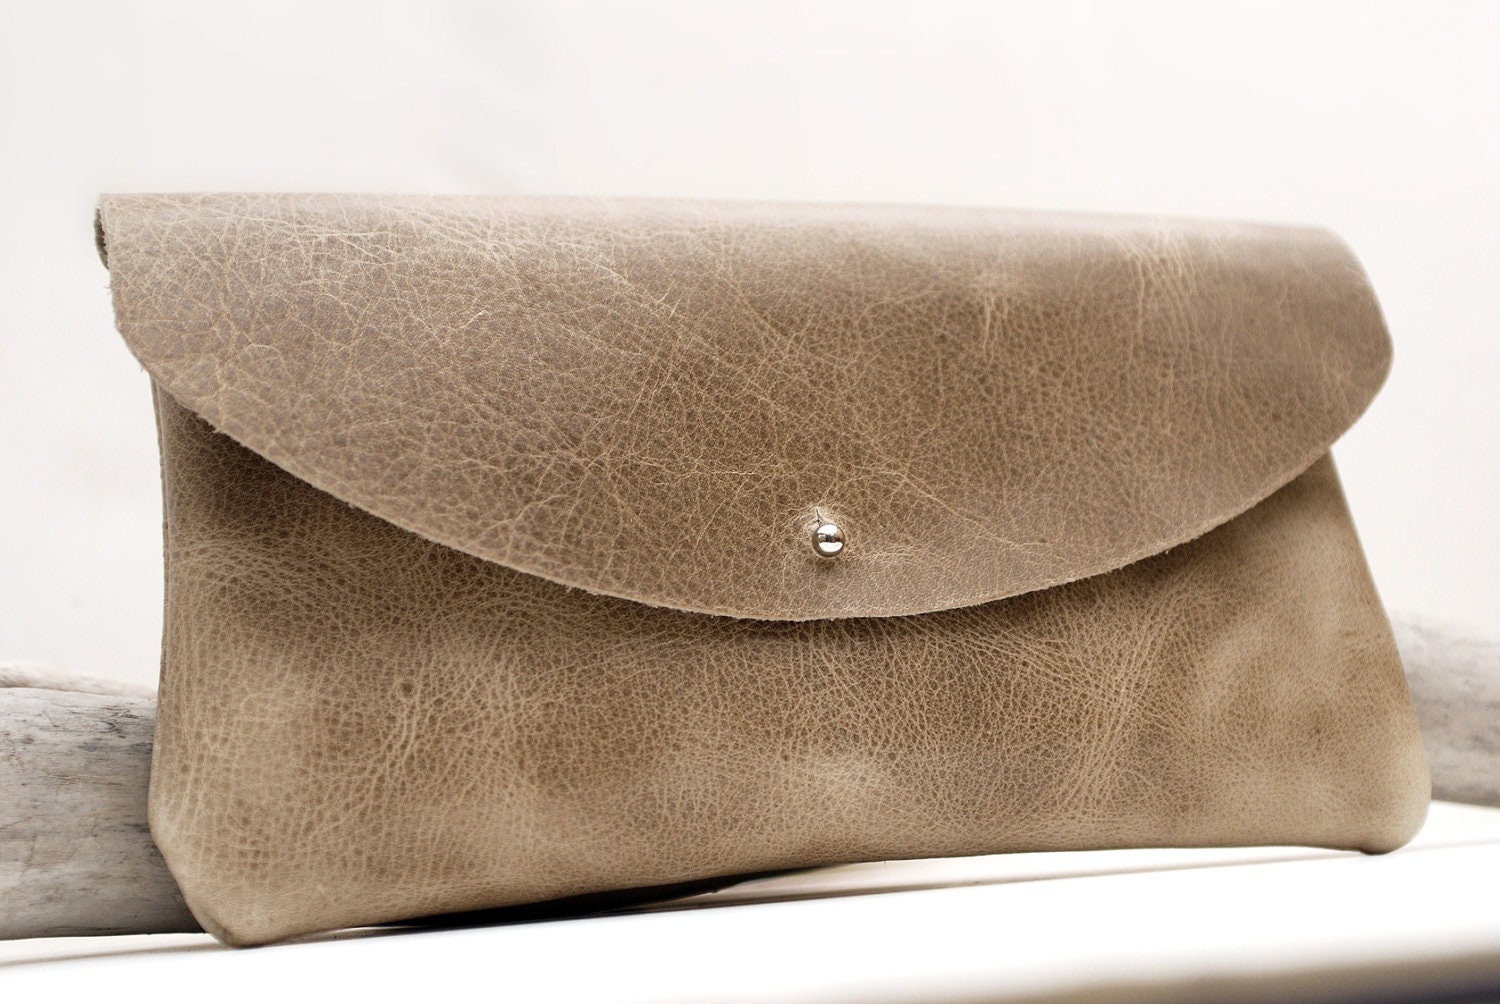 Taupe leather clutch bag. Oiled leather by JustWanderlustShop